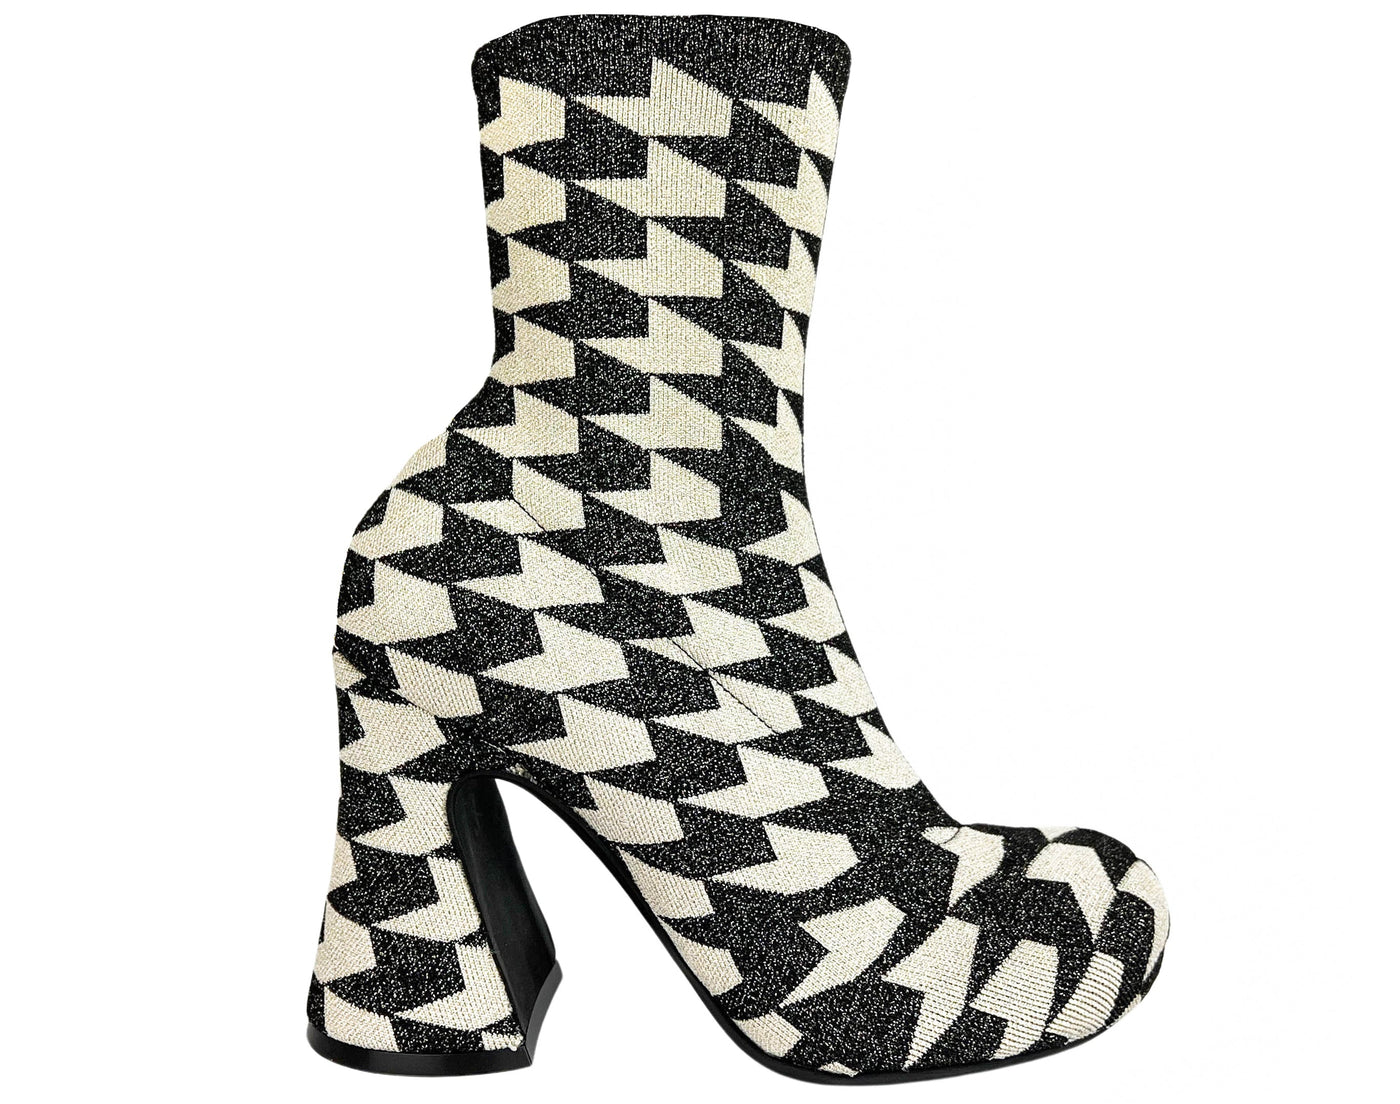 Marni Jacquard Lurex Ankle Boots in Black and Cream - Discounts on Marni at UAL